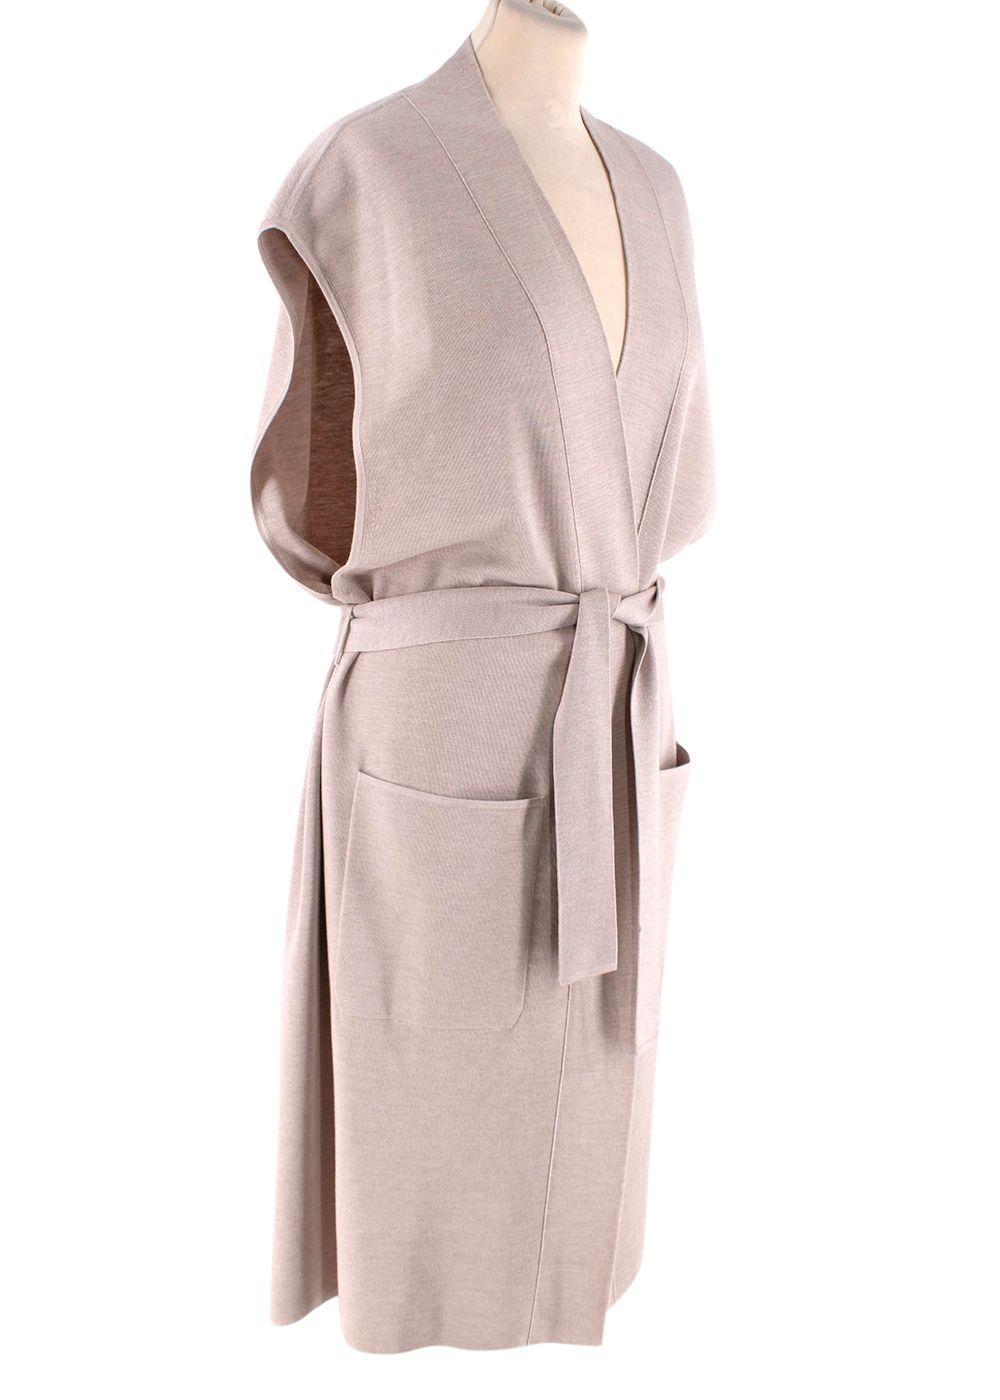 Hermes Beige Cashmere-Silk Longline Belted Cardigan

-Fine soft cashmere & silk blend
-Lightweight
-Sleeveless cardigan
-Belted, removable
-Two pockets, one featuring embroidered logo
-Open front, no fastenings

Made in Italy

PLEASE NOTE, THESE